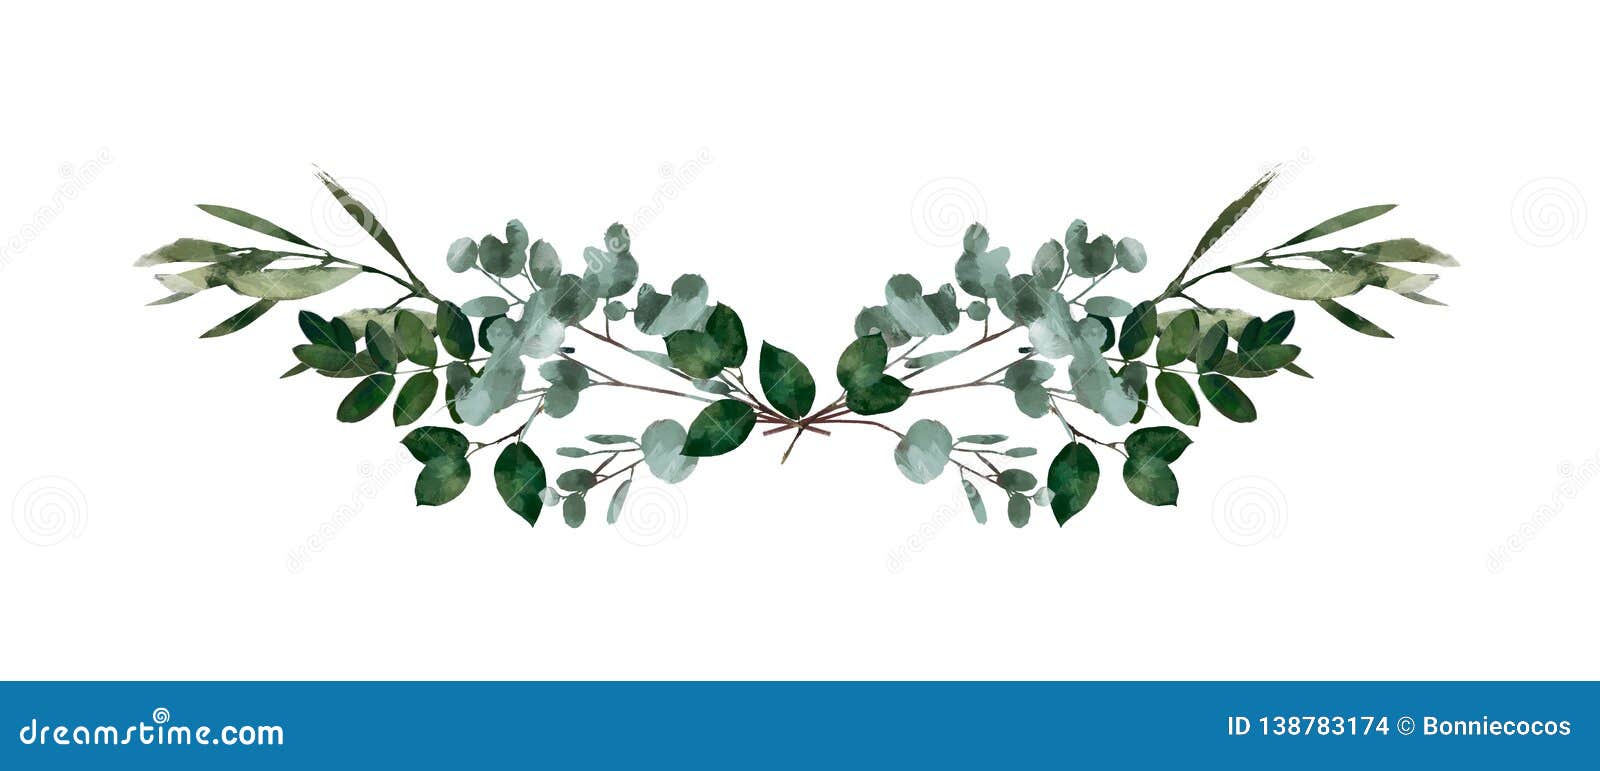 Borders PNG Greenery Arrangements Watercolor Greenery Frames Bright Foliage Free Commercial Use Green Leaves Branches Clip Art